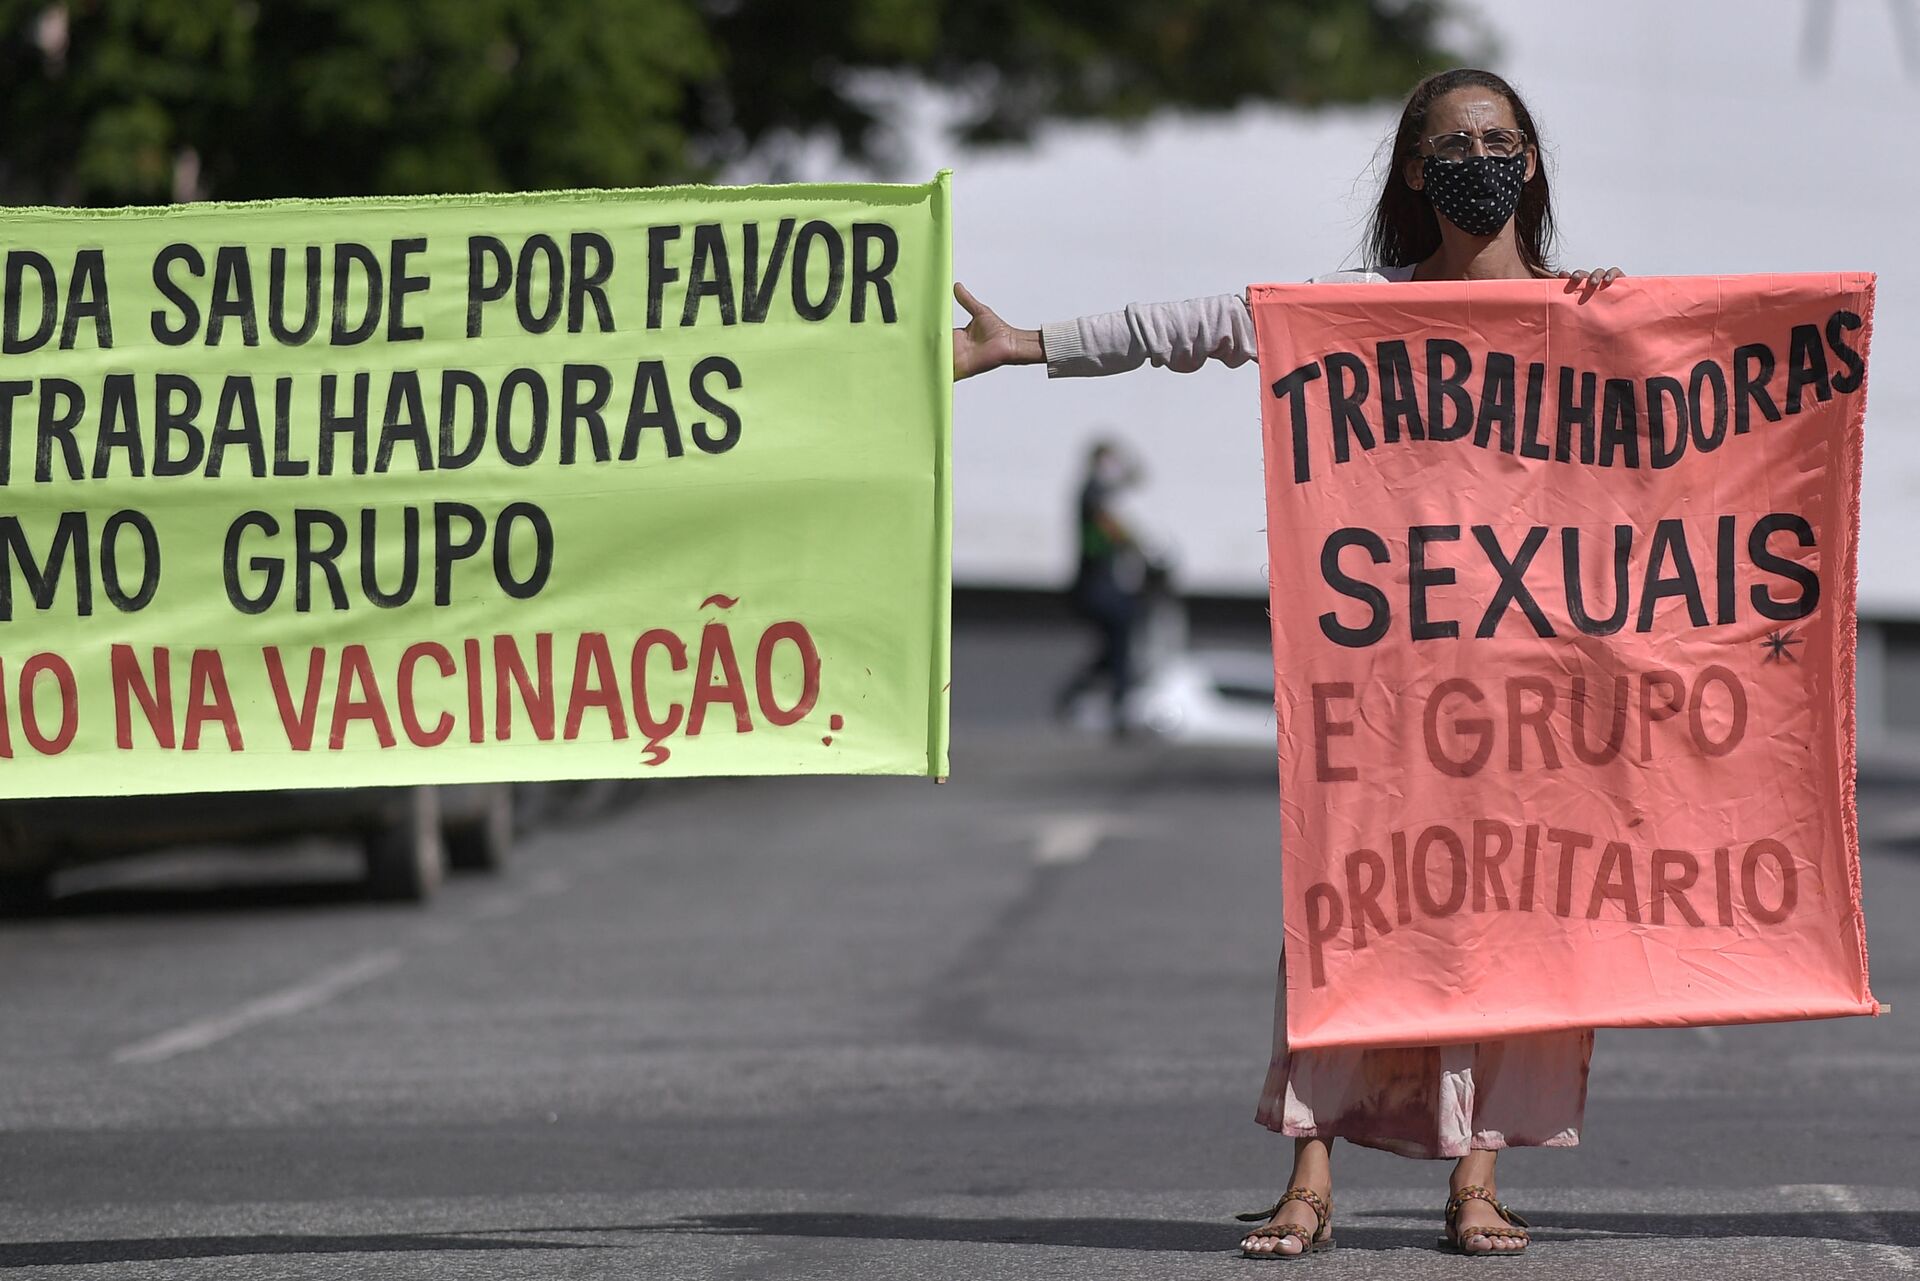 Brazilian Prostitutes Demand First-Line COVID Vaccination as 'Priority Group' - Sputnik International, 1920, 07.04.2021